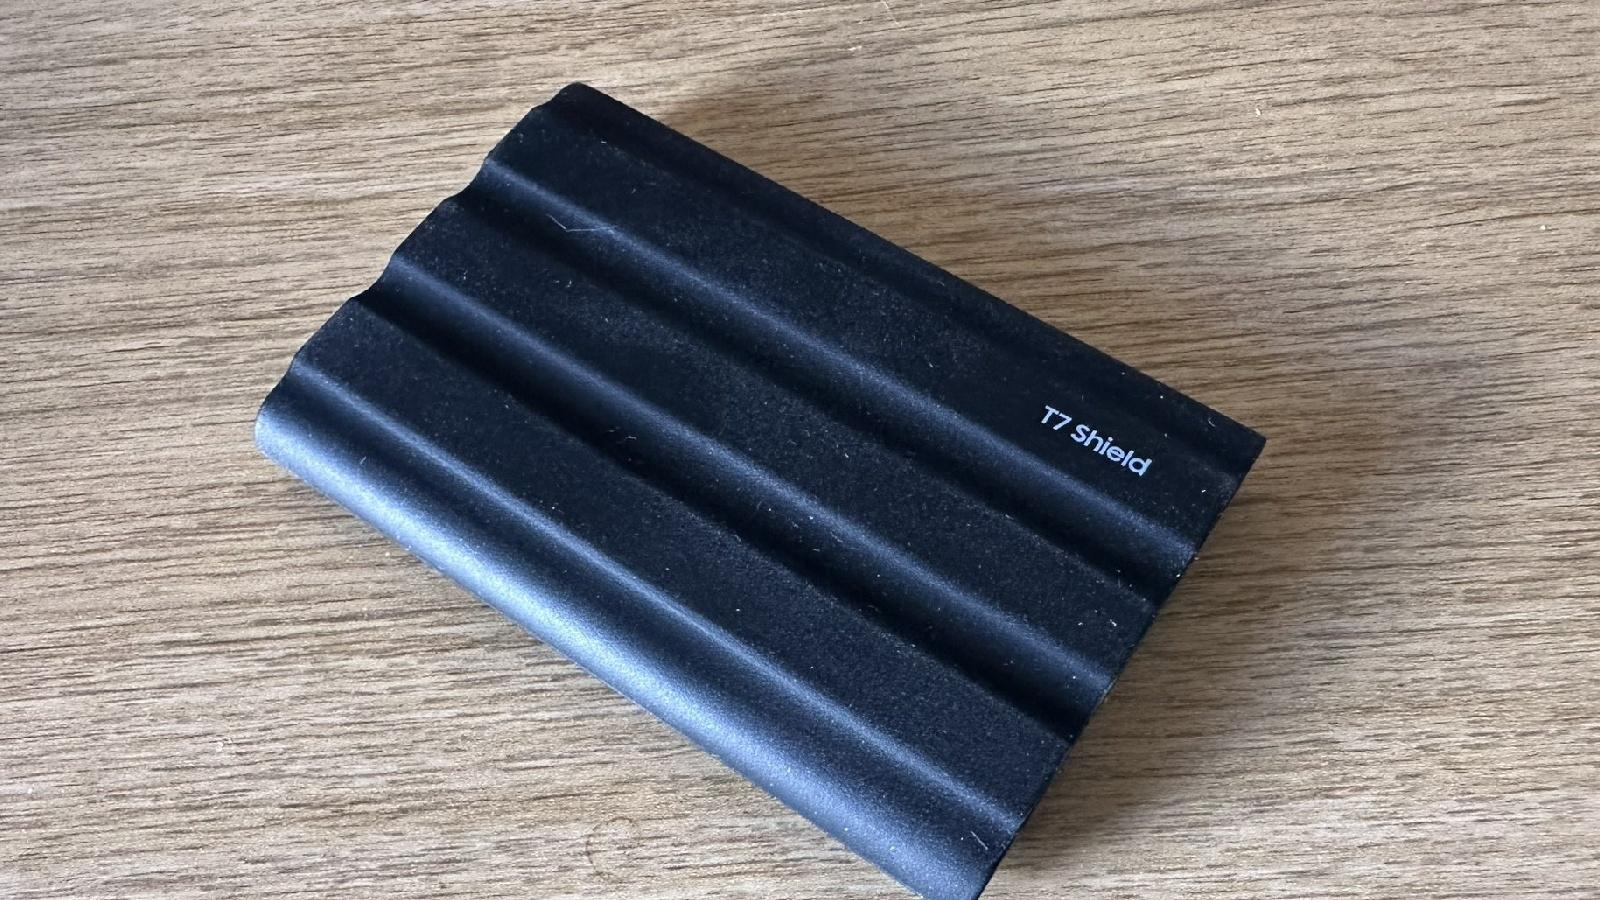 Samsung T7 Shield portable SSD review: Ready & rugged - Dexerto